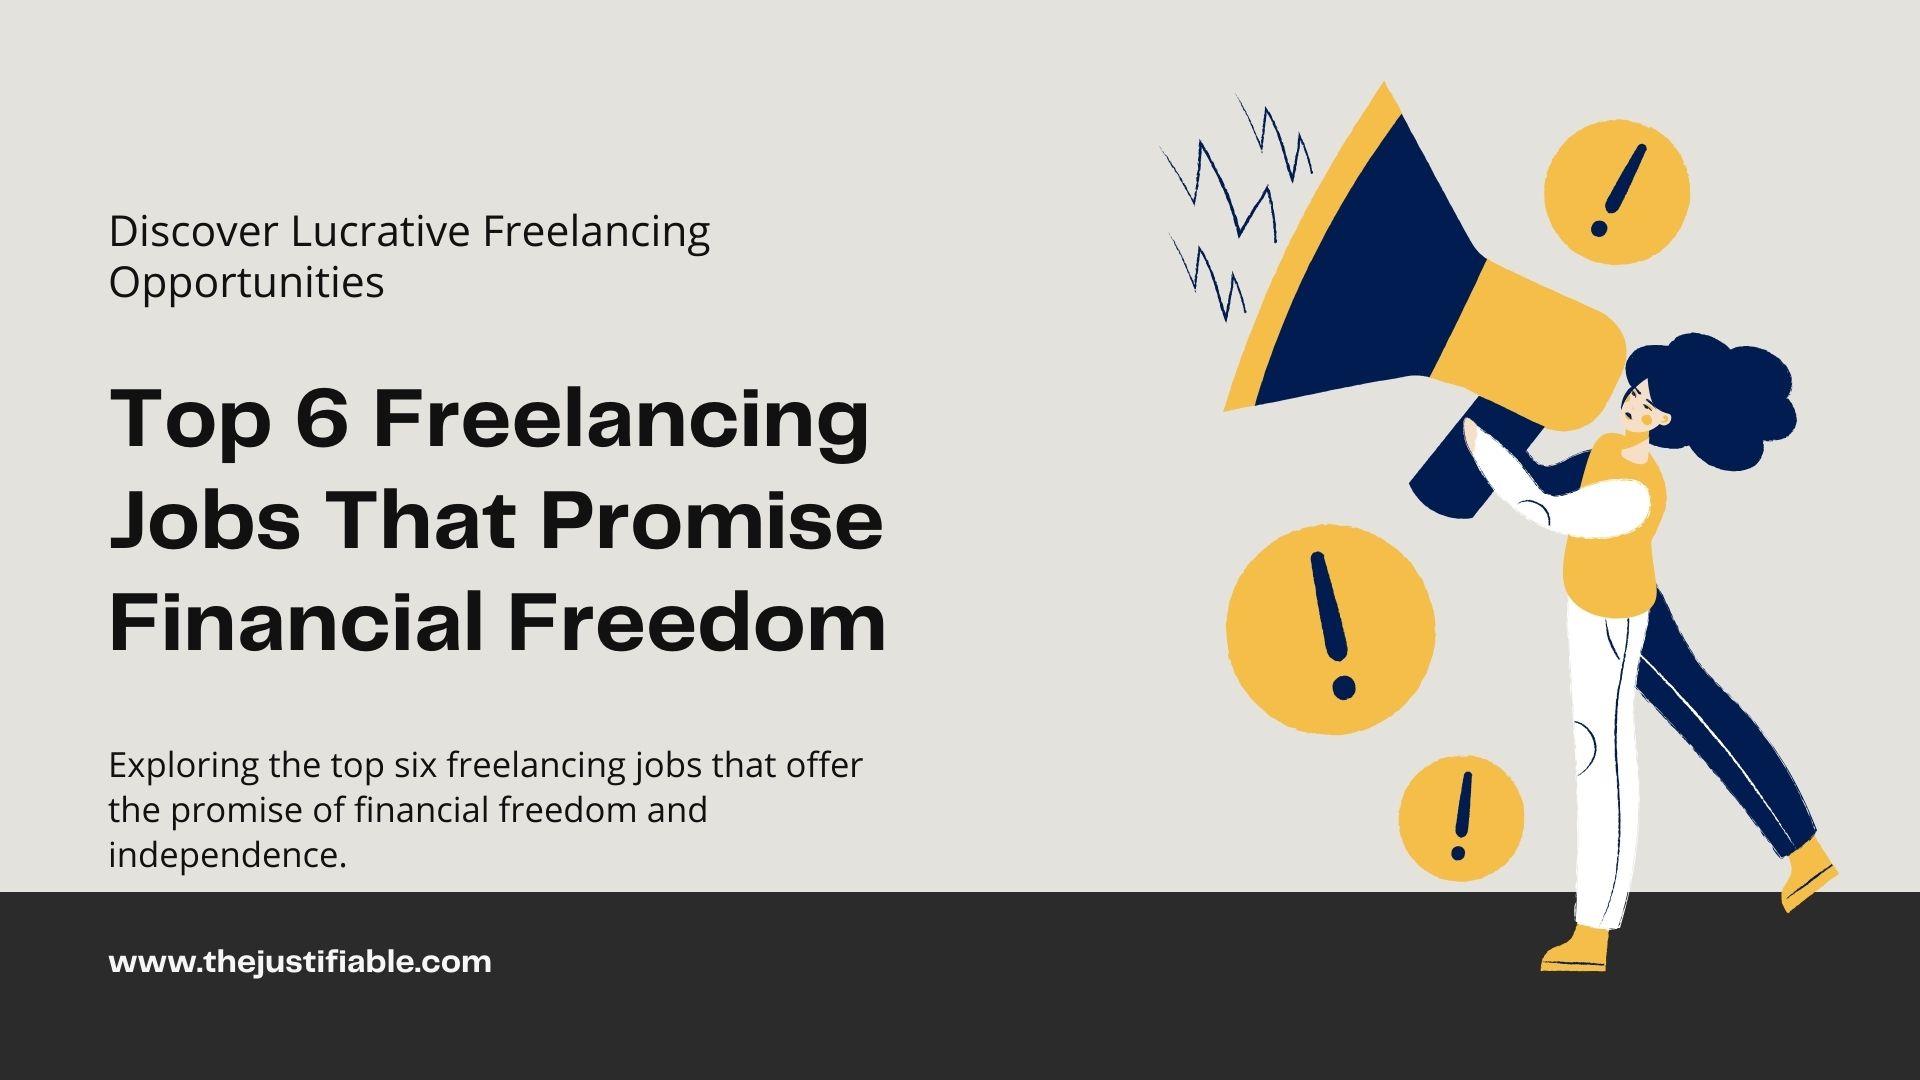 The image is a graphic related to freelancing jobs.